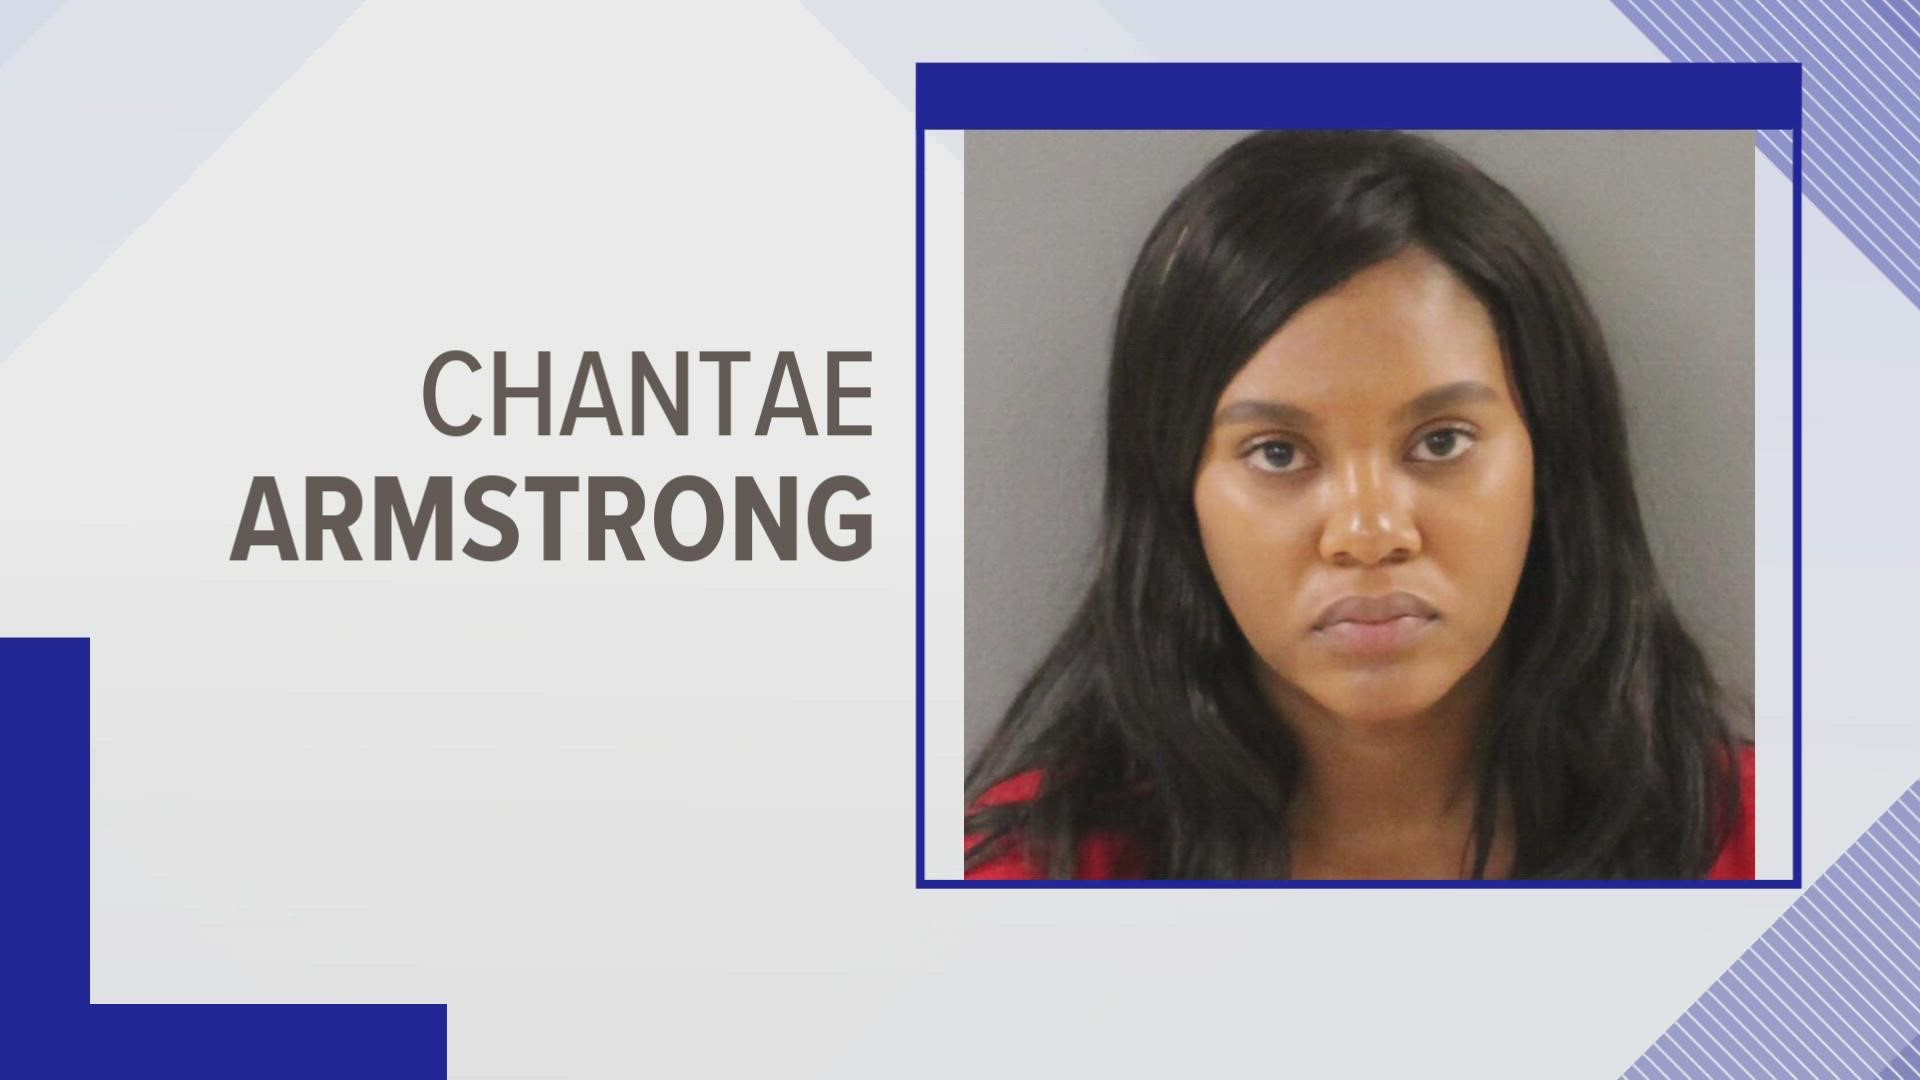 The Knoxville mother accused of a 2019 hot car death of her 6-month-old boy will appear in court. Chantae Armstrong faces first-degree murder charges.